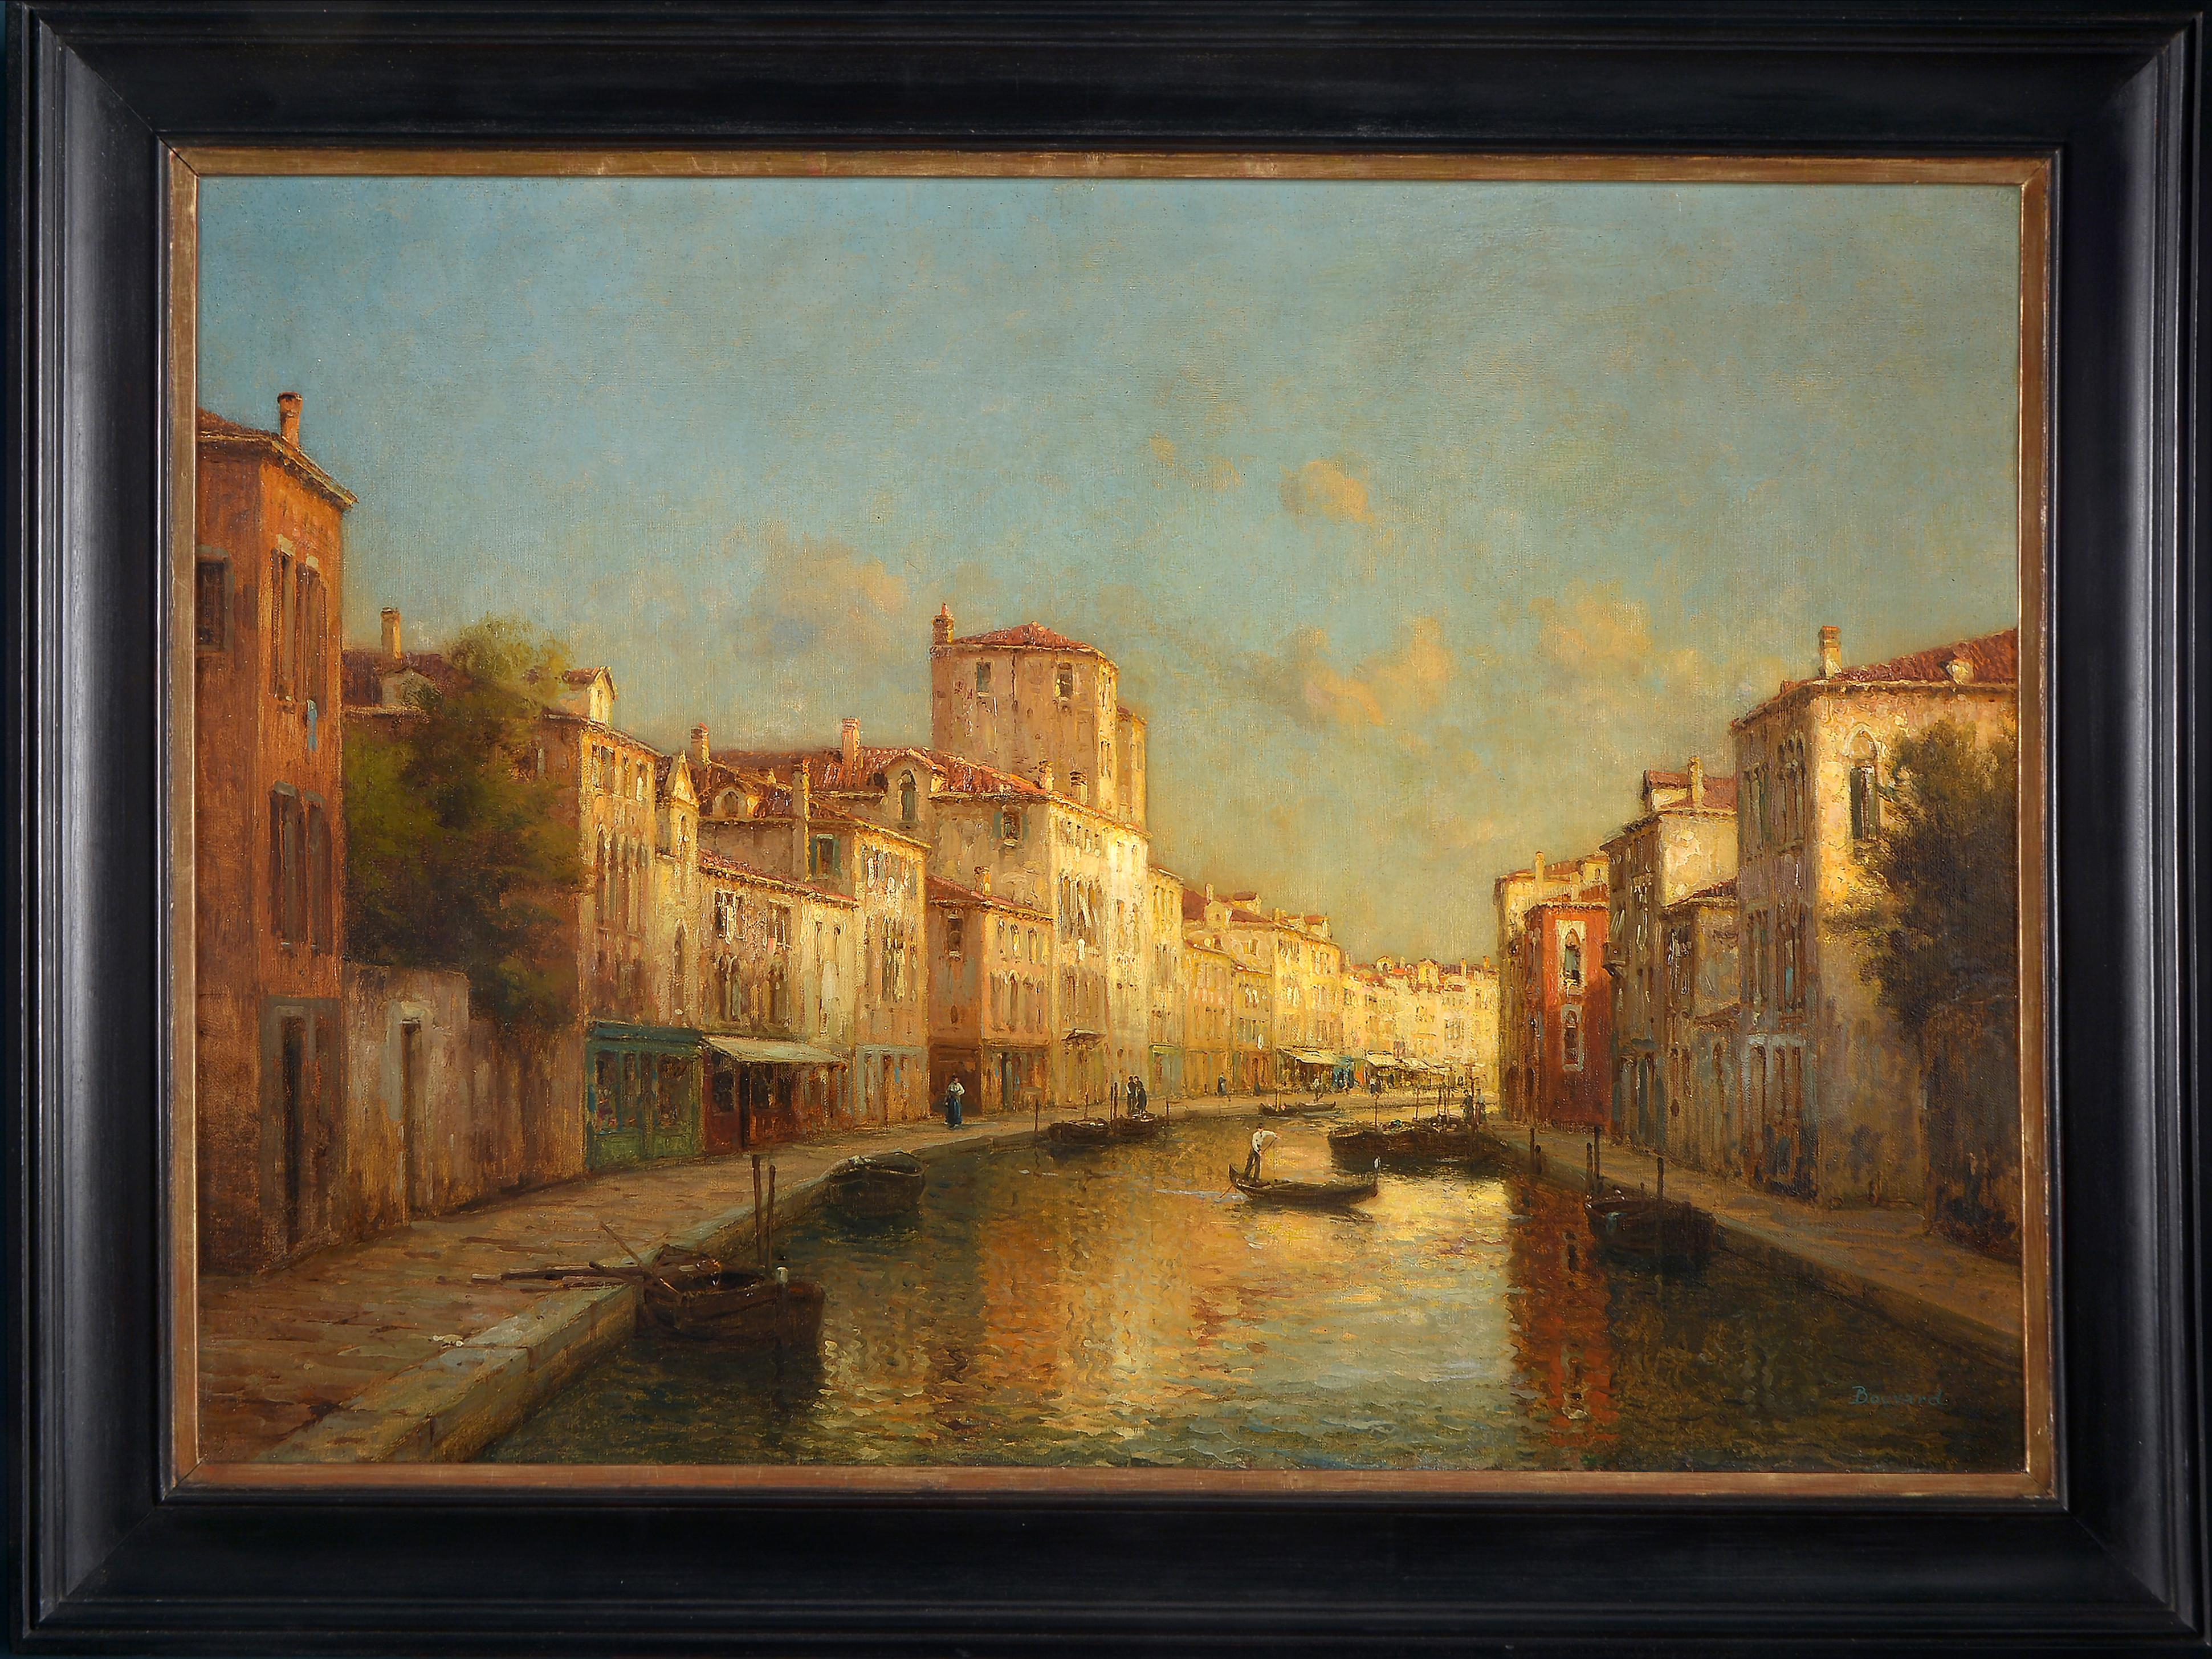 Antoine Bouvard Snr.  Landscape Painting - A gondolier on a Venetian canal at sunset